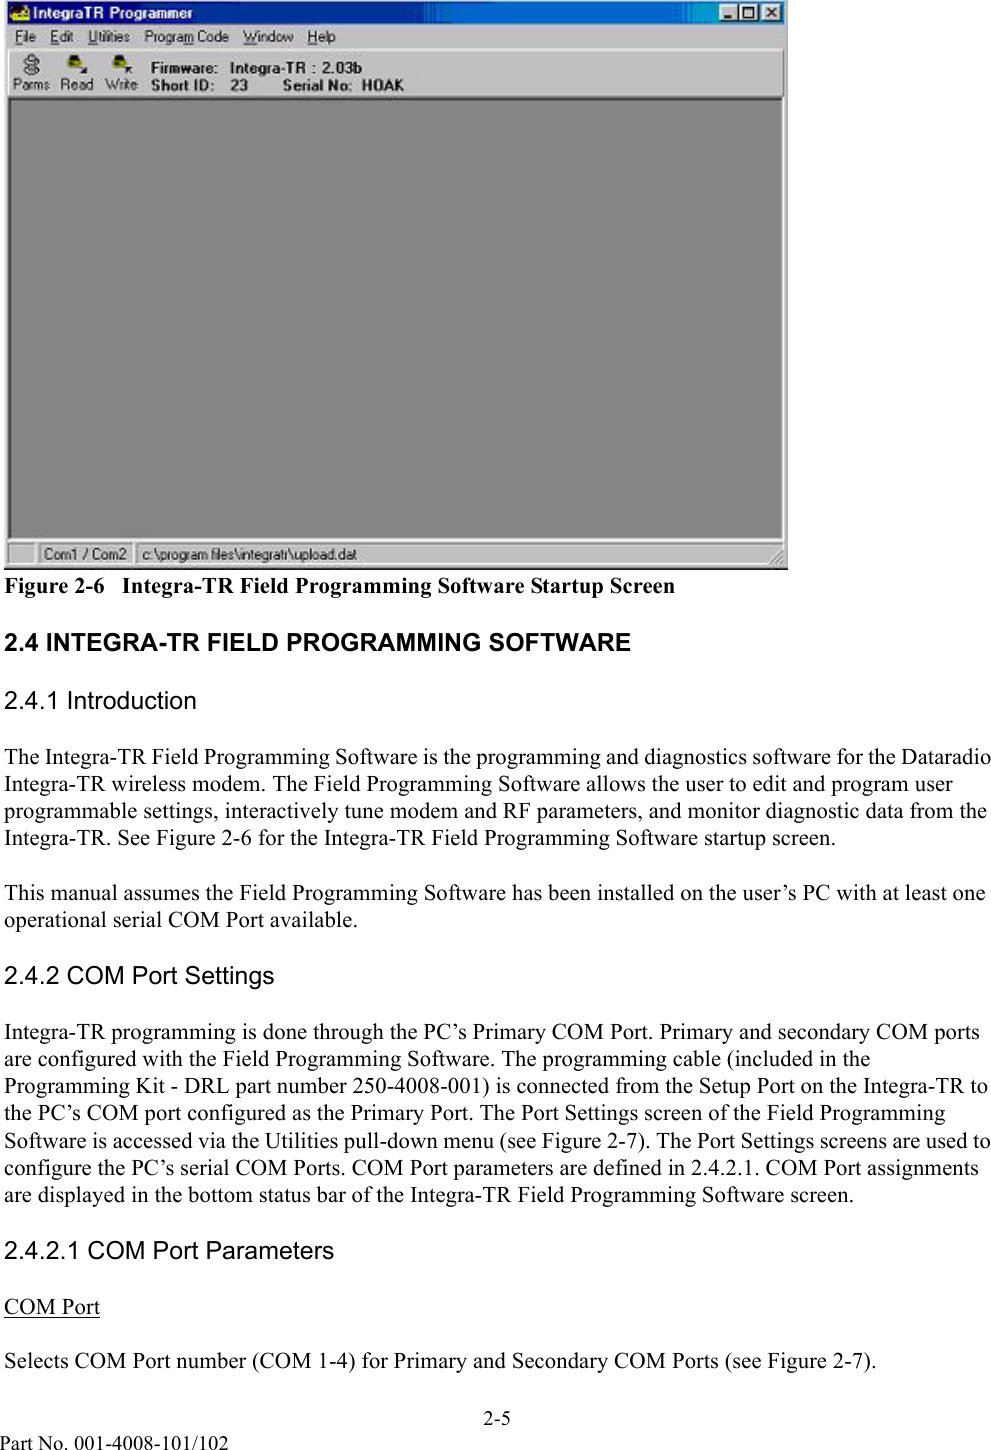 2-5Part No. 001-4008-101/102Figure 2-6   Integra-TR Field Programming Software Startup Screen2.4 INTEGRA-TR FIELD PROGRAMMING SOFTWARE2.4.1 IntroductionThe Integra-TR Field Programming Software is the programming and diagnostics software for the Dataradio Integra-TR wireless modem. The Field Programming Software allows the user to edit and program user programmable settings, interactively tune modem and RF parameters, and monitor diagnostic data from the Integra-TR. See Figure 2-6 for the Integra-TR Field Programming Software startup screen.This manual assumes the Field Programming Software has been installed on the user’s PC with at least one operational serial COM Port available. 2.4.2 COM Port SettingsIntegra-TR programming is done through the PC’s Primary COM Port. Primary and secondary COM ports are configured with the Field Programming Software. The programming cable (included in the Programming Kit - DRL part number 250-4008-001) is connected from the Setup Port on the Integra-TR to the PC’s COM port configured as the Primary Port. The Port Settings screen of the Field Programming Software is accessed via the Utilities pull-down menu (see Figure 2-7). The Port Settings screens are used to configure the PC’s serial COM Ports. COM Port parameters are defined in 2.4.2.1. COM Port assignments are displayed in the bottom status bar of the Integra-TR Field Programming Software screen.2.4.2.1 COM Port ParametersCOM PortSelects COM Port number (COM 1-4) for Primary and Secondary COM Ports (see Figure 2-7).